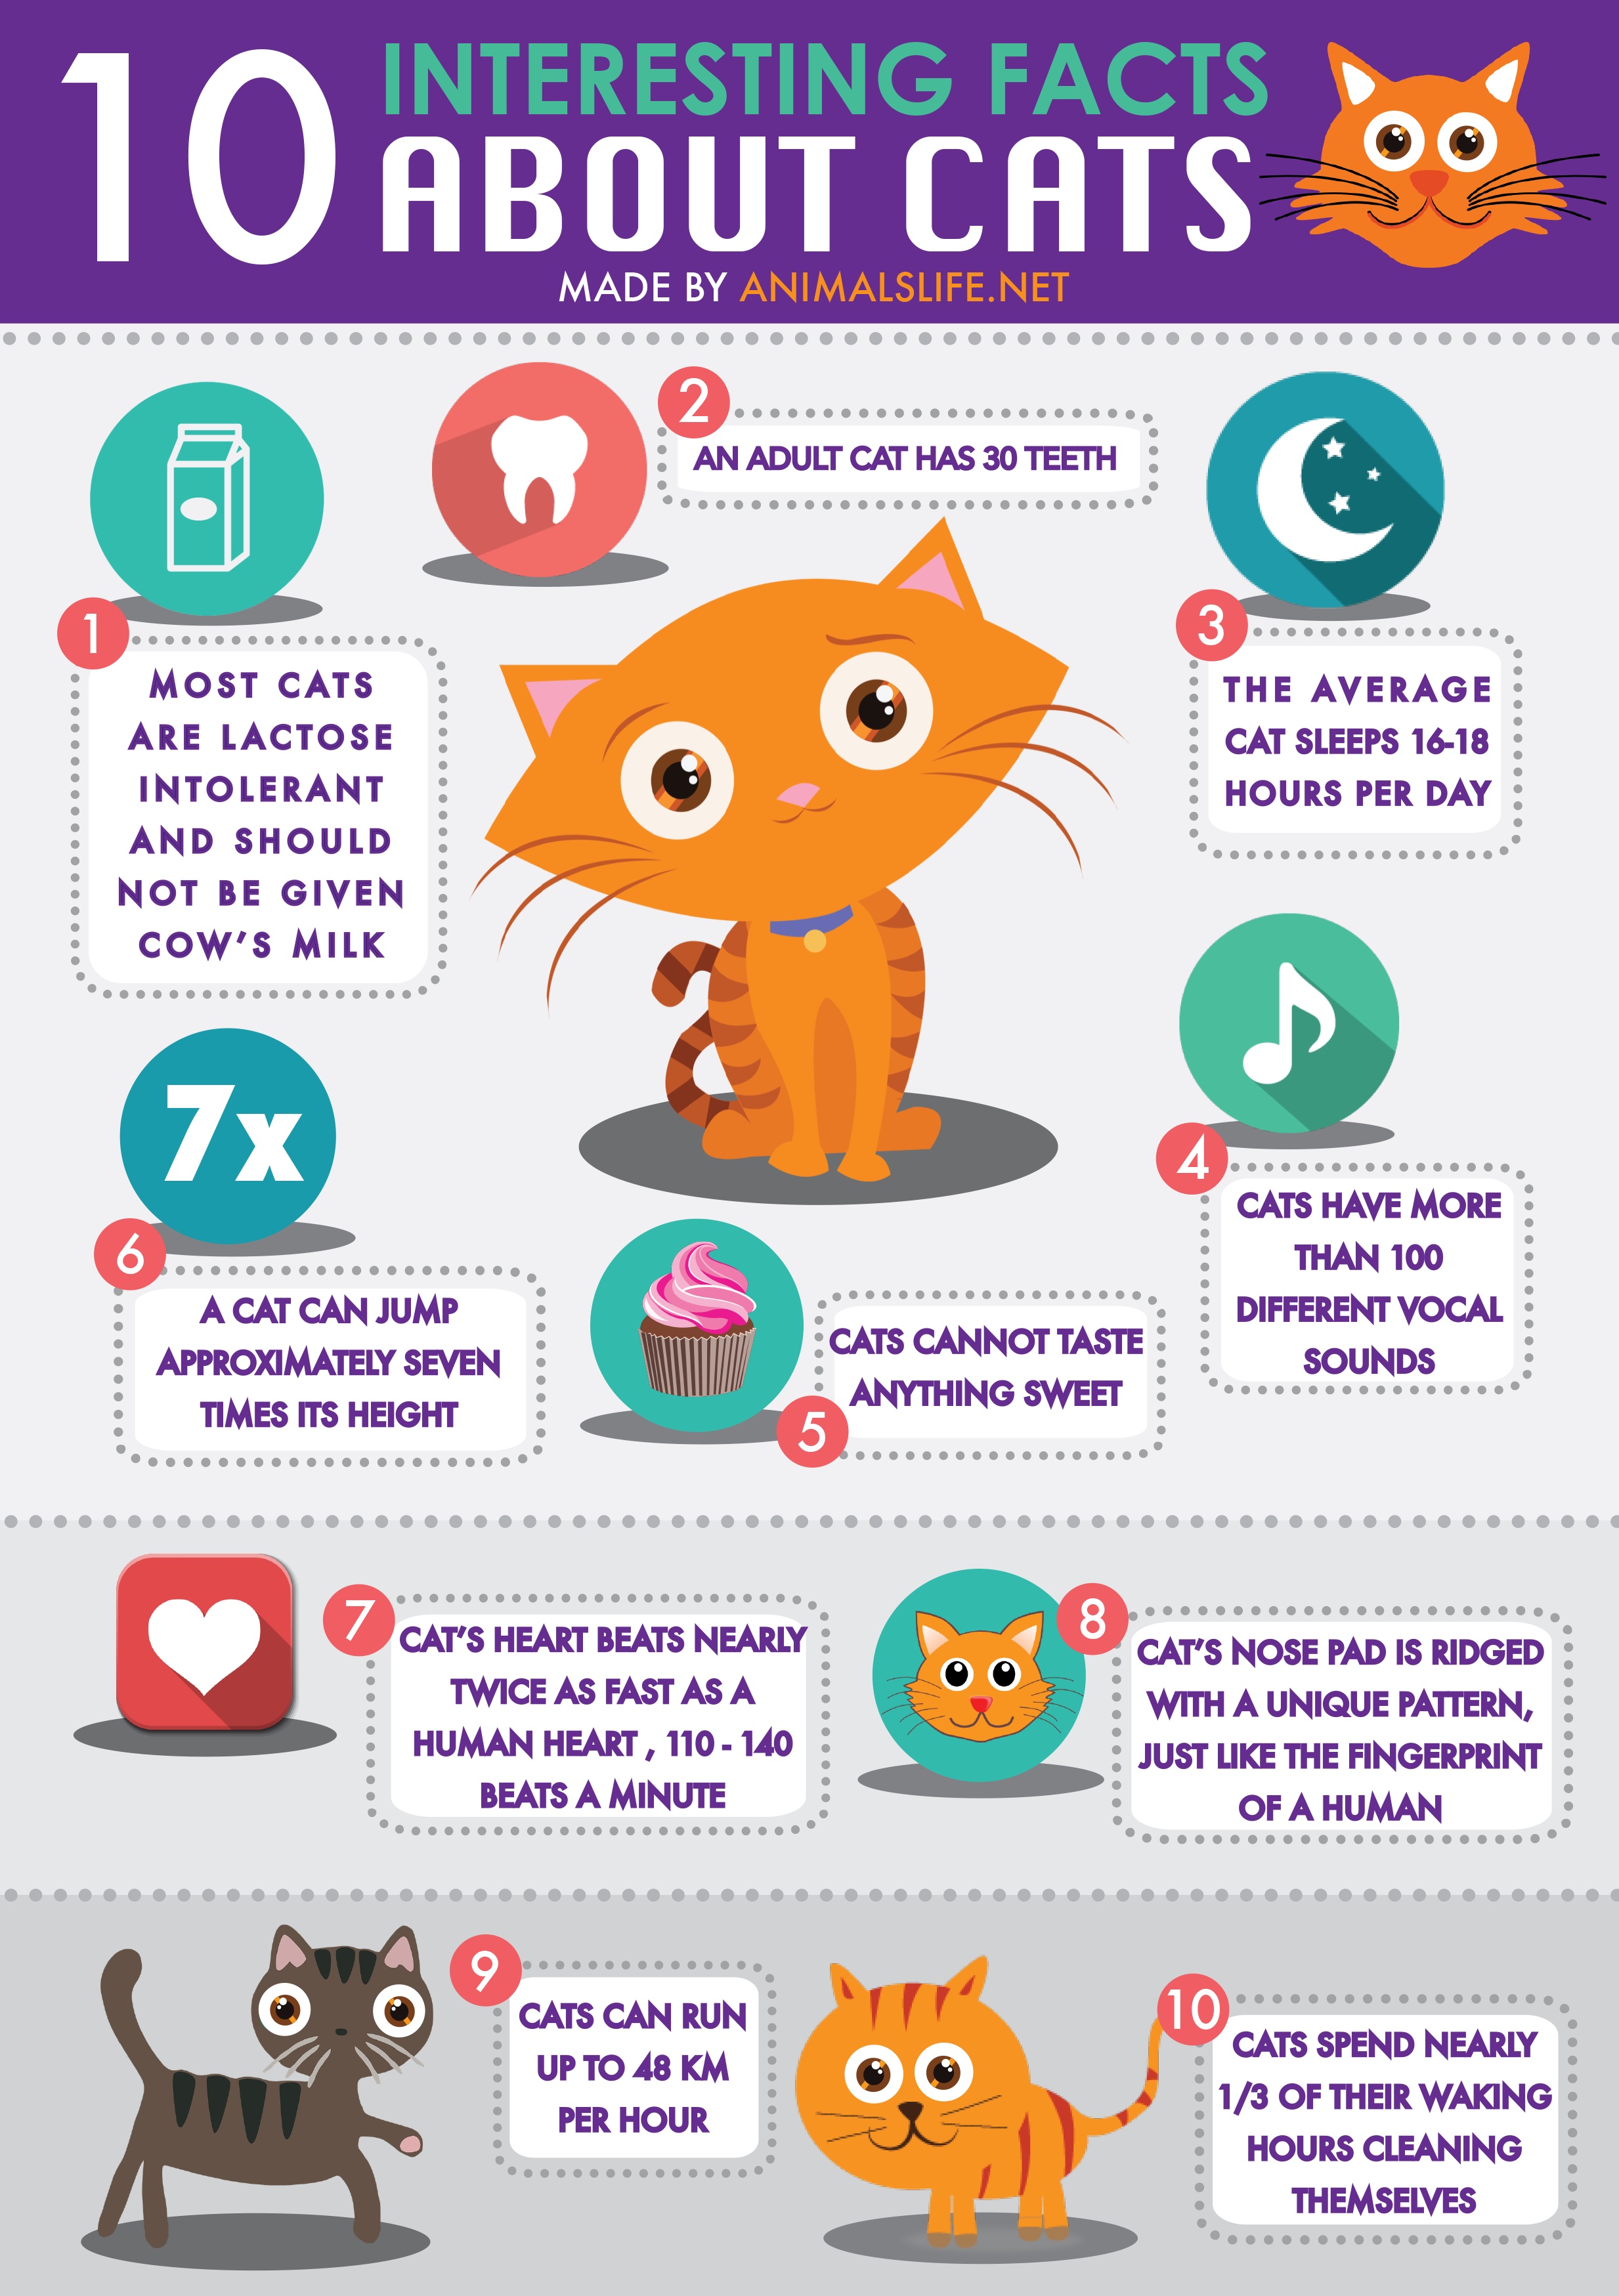 10 Interesting Facts About Cats by Animals Life NET - Animals Life -  Donate, Support